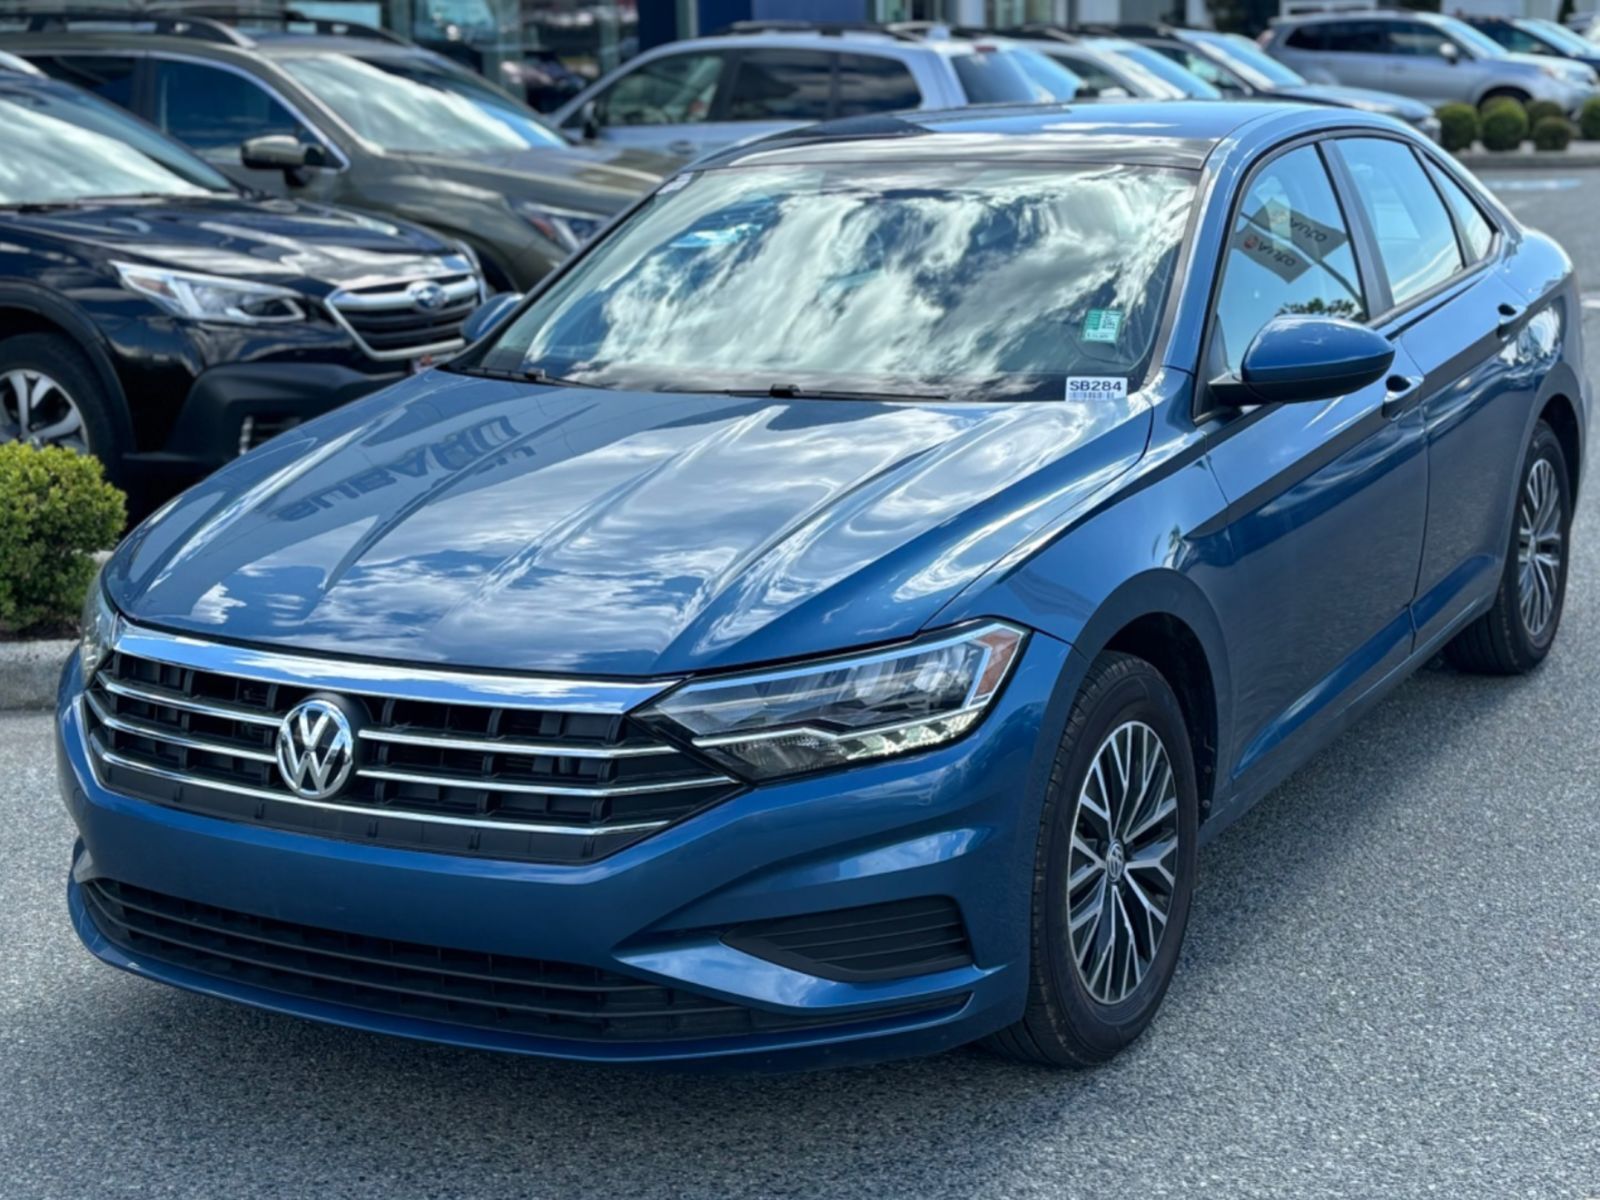 2021 Volkswagen Jetta CLEAN CARFAX | SUNROOF | LOW KMS | LEATHER SEATS |